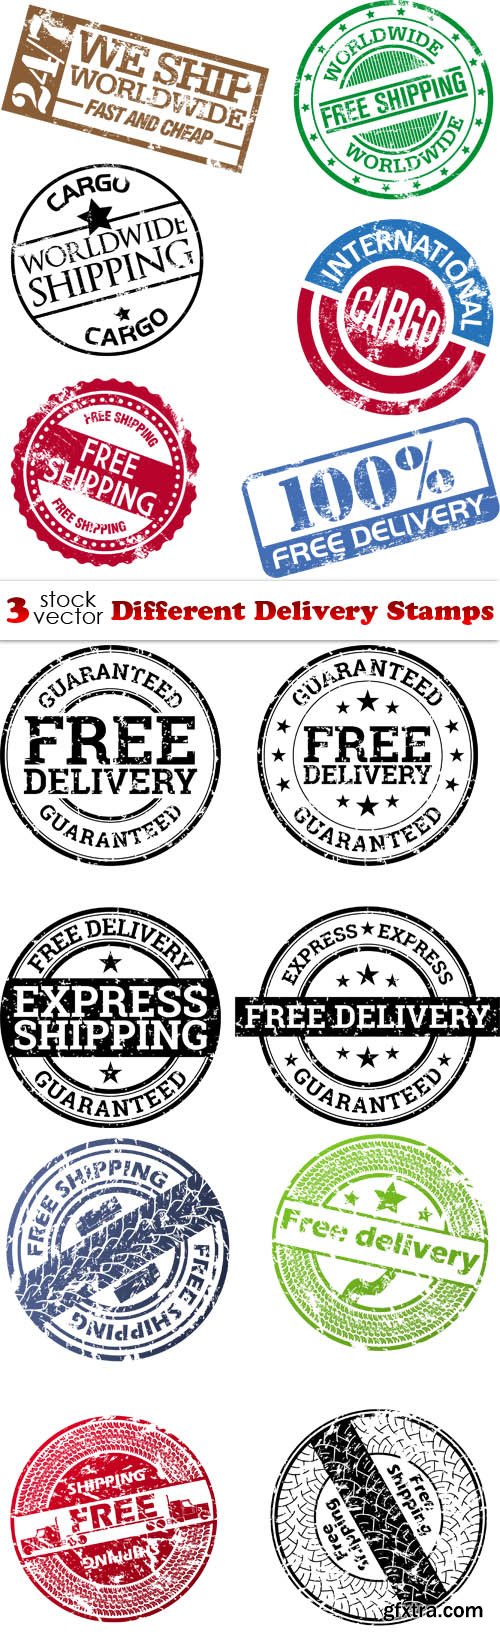 Vectors - Different Delivery Stamps